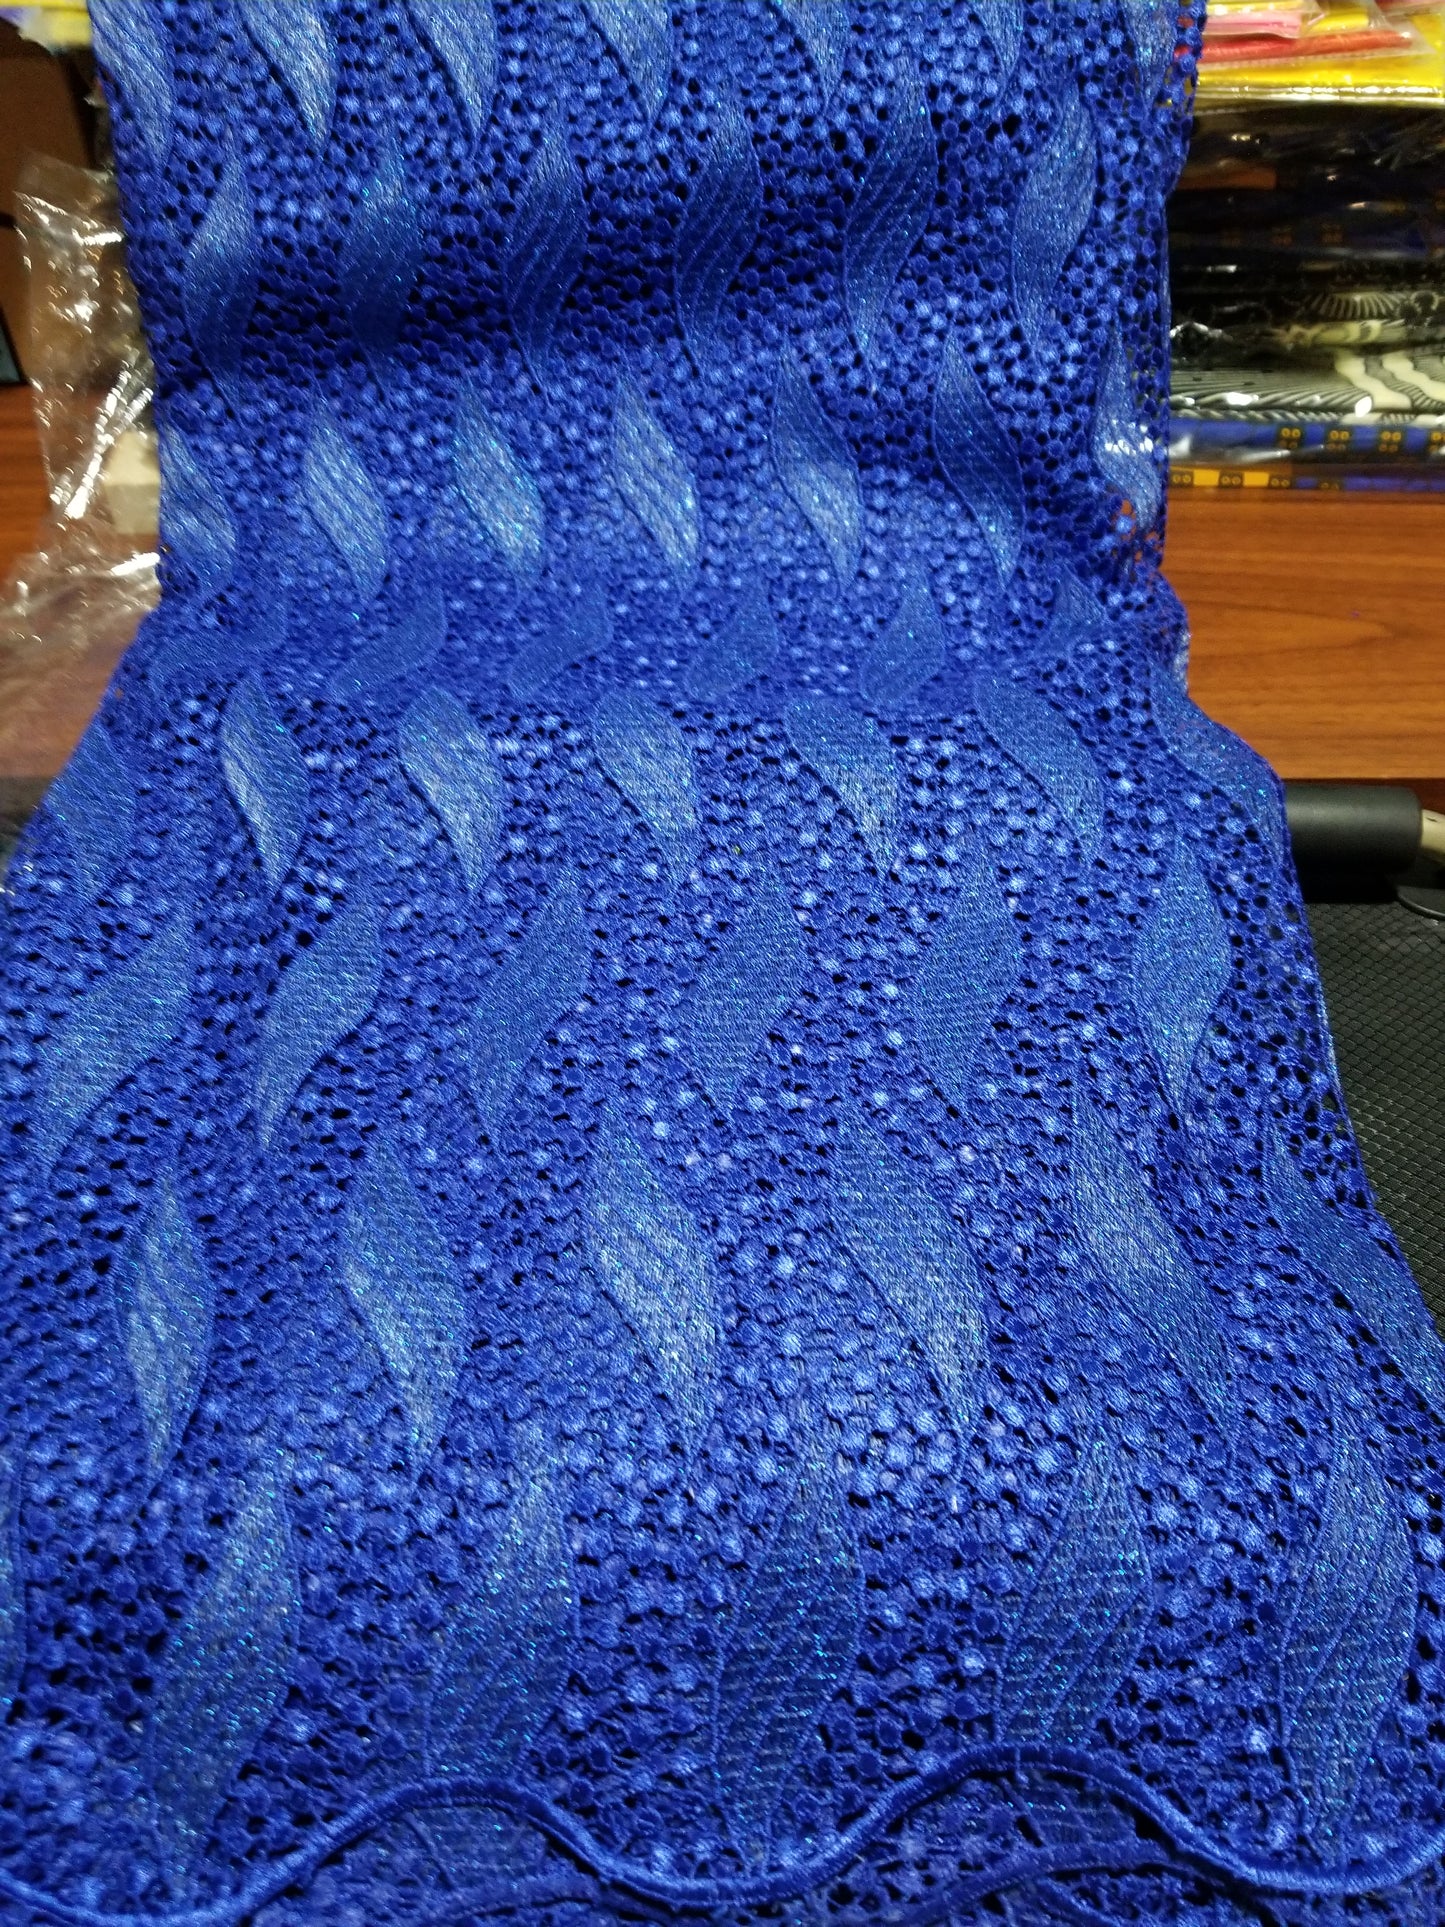 Clearance Item: Royal blue Cord-lace fabric. Soft texture. Nigerian Guipure-lace for making party outfit. Super swiss quality